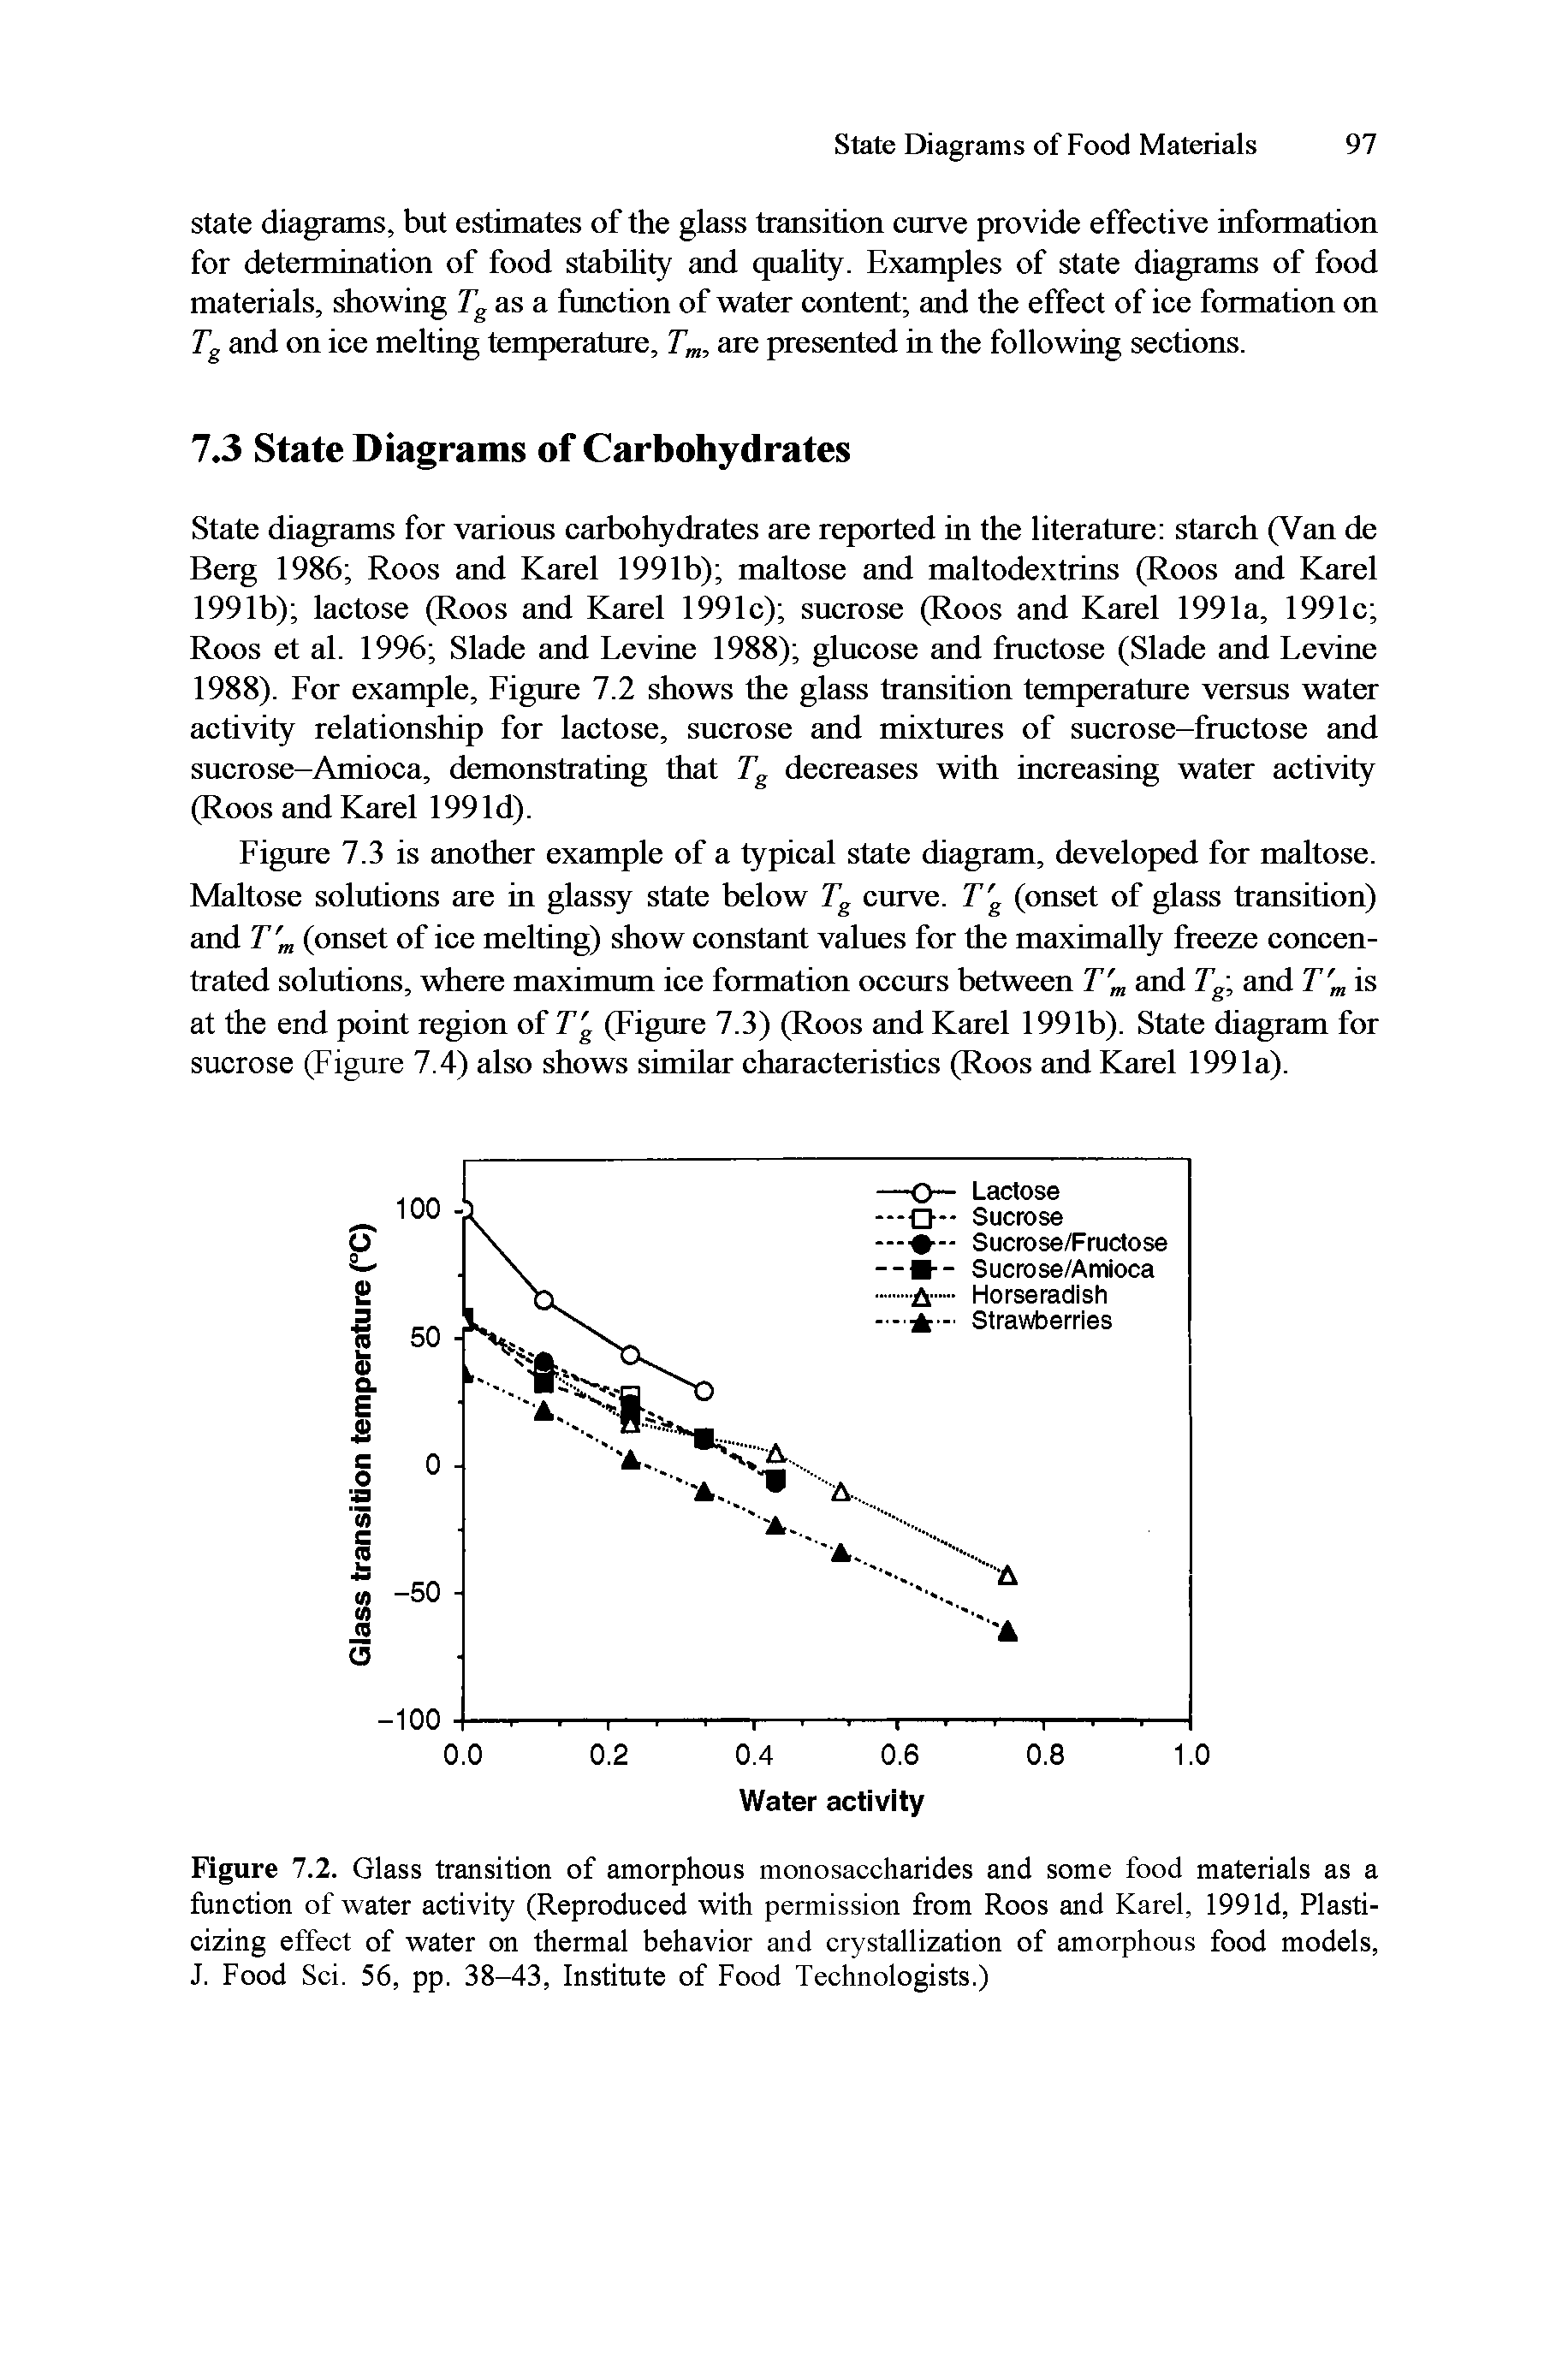 Figure 7.2. Glass transition of amorphous monosaccharides and some food materials as a function of water activity (Reproduced with permission from Roos and Karel, 199 Id, Plasticizing effect of water on thermal behavior and crystallization of amorphous food models, J. Food Sci. 56, pp. 38-43, Institute of Food Technologists.)...